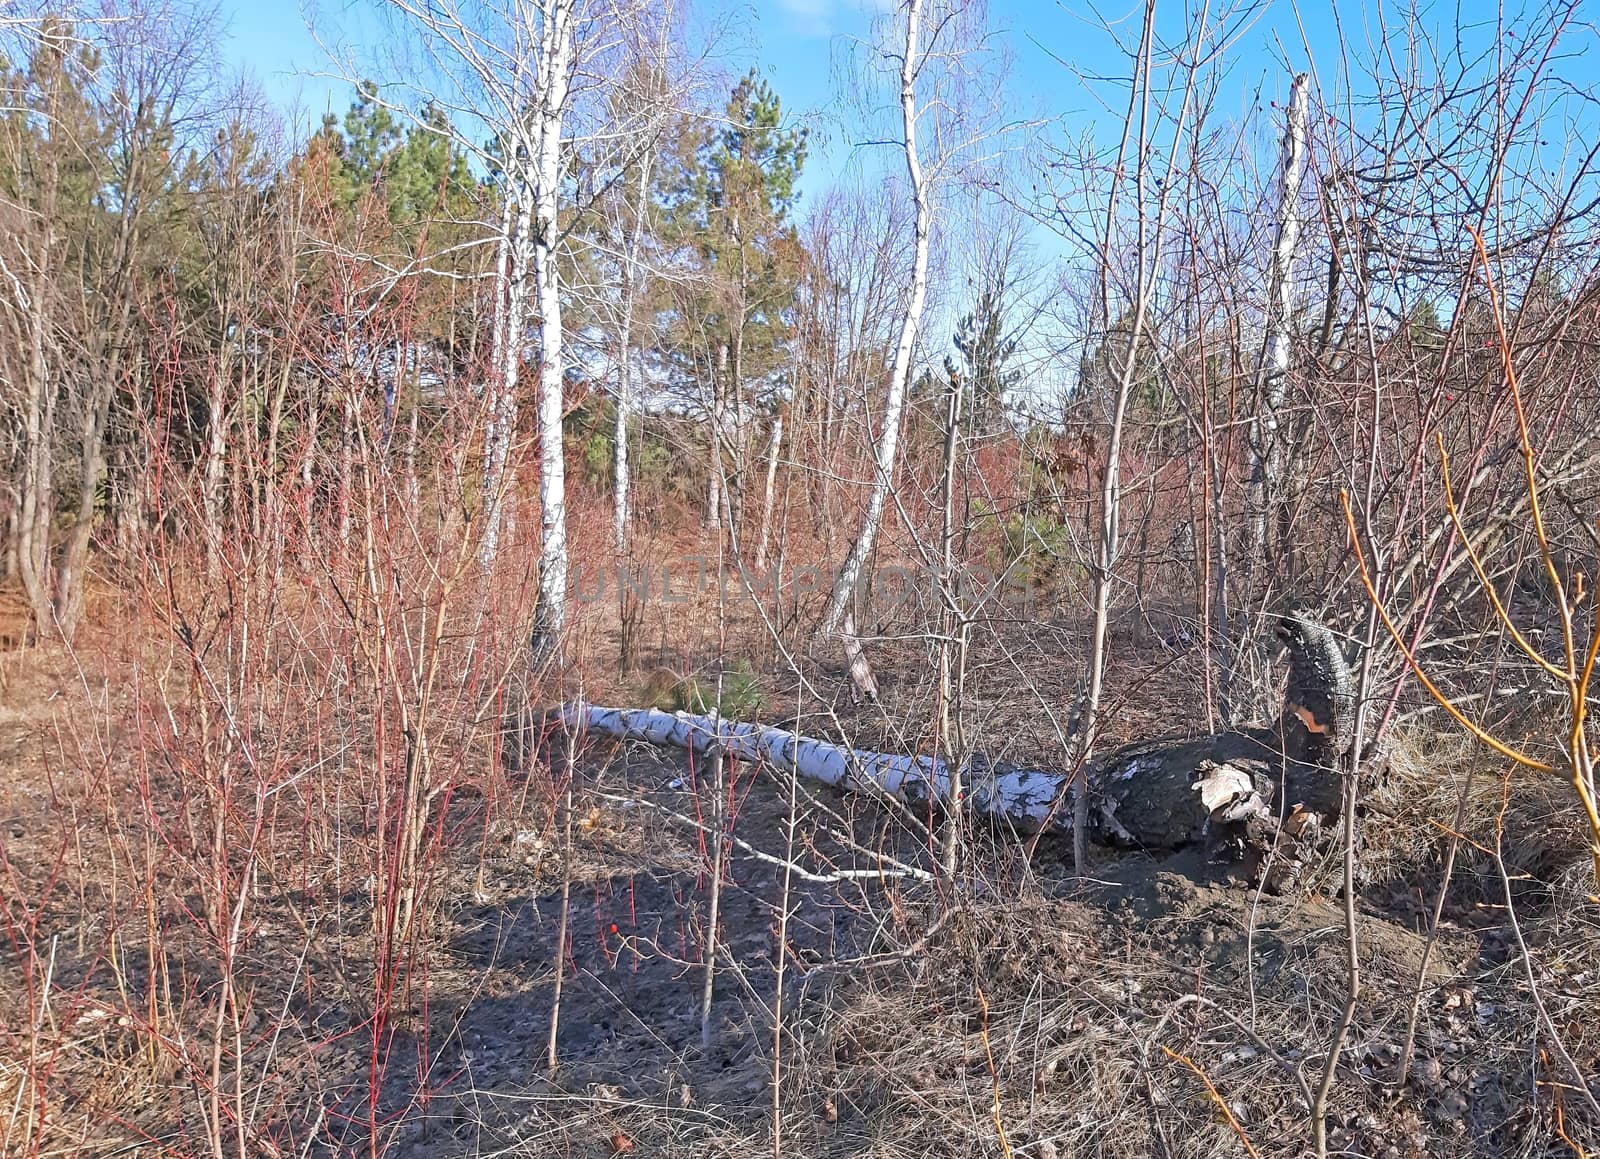 Birch tree felled in a forest in the early spring by Mindru